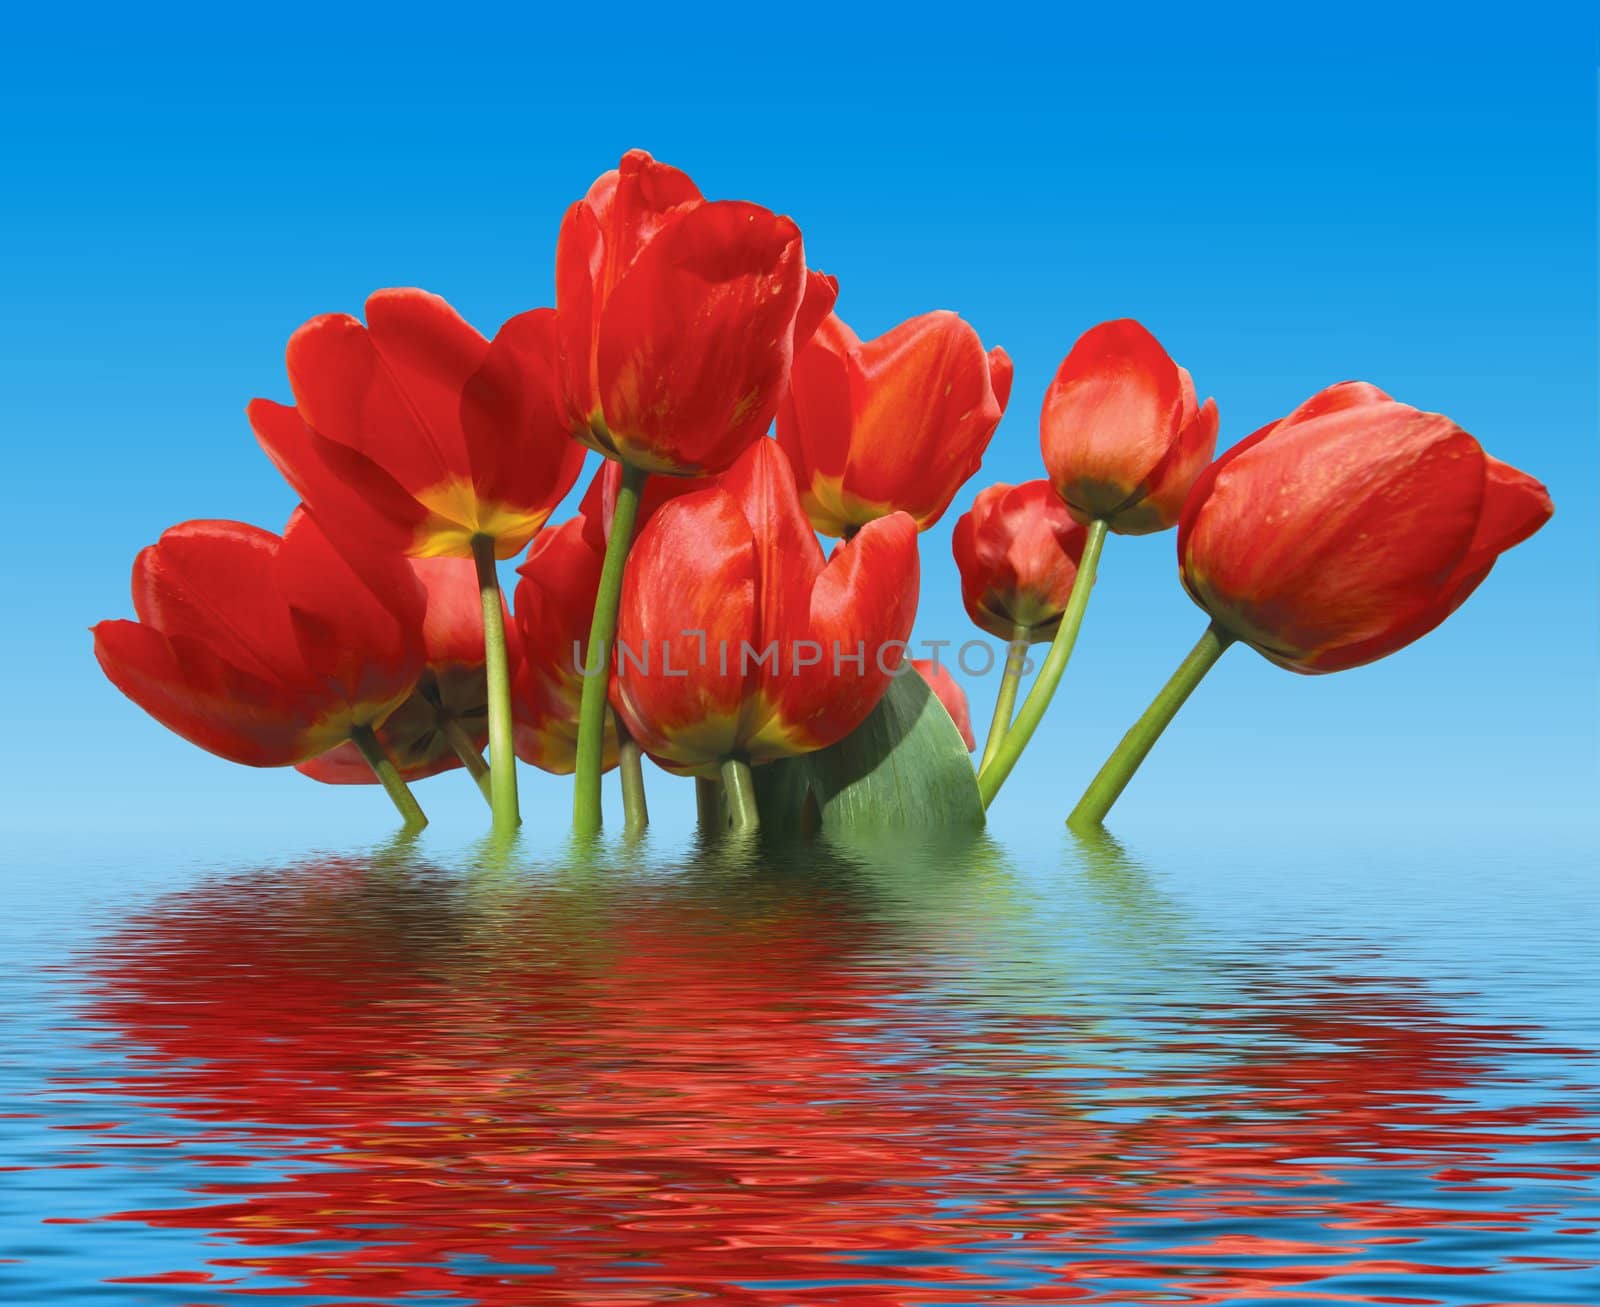 An image of nice red tulips in water